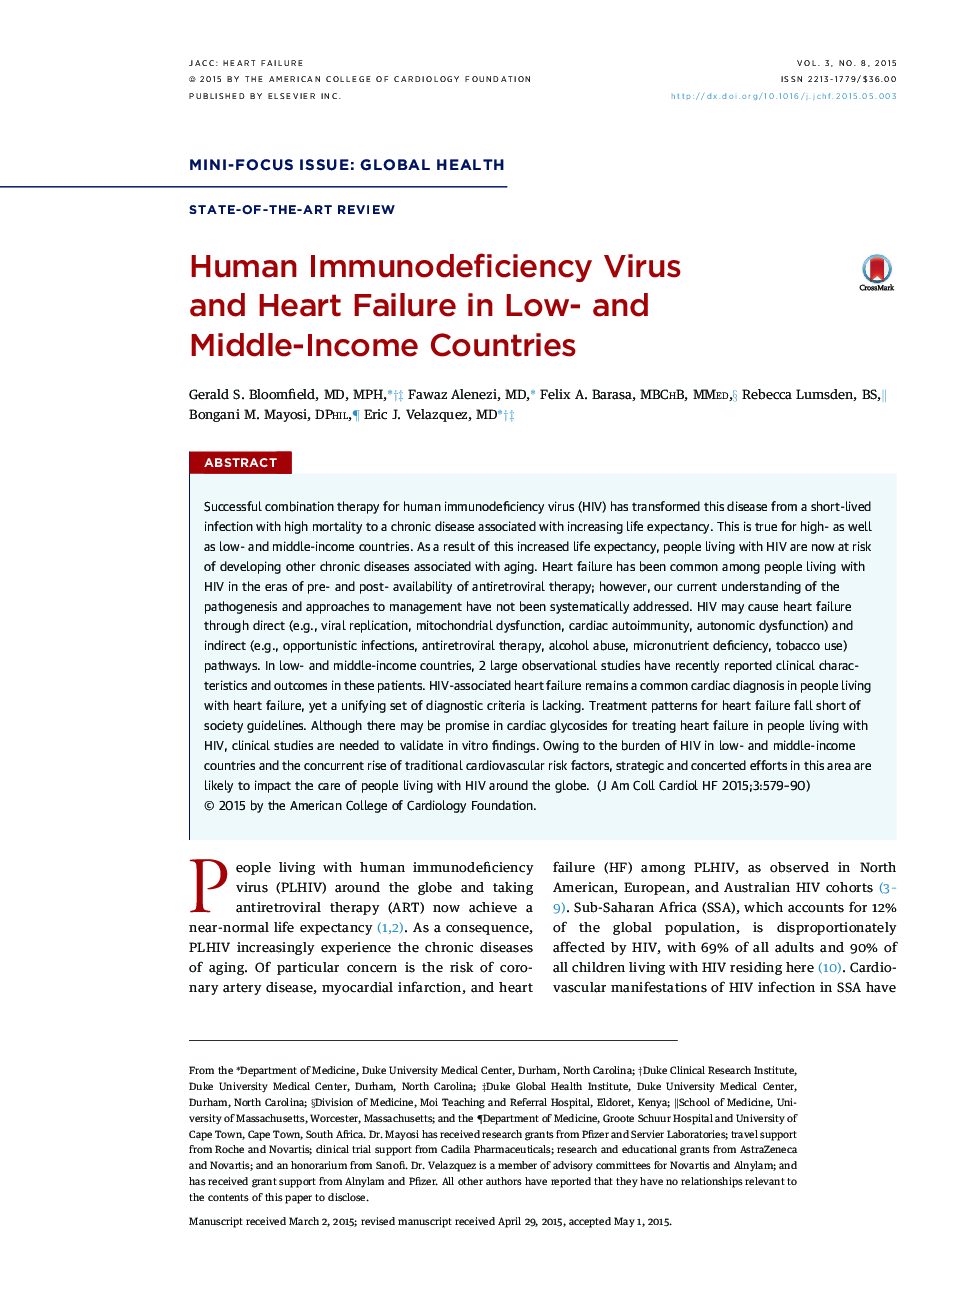 Human Immunodeficiency Virus and Heart Failure in Low- and Middle-Income Countries 